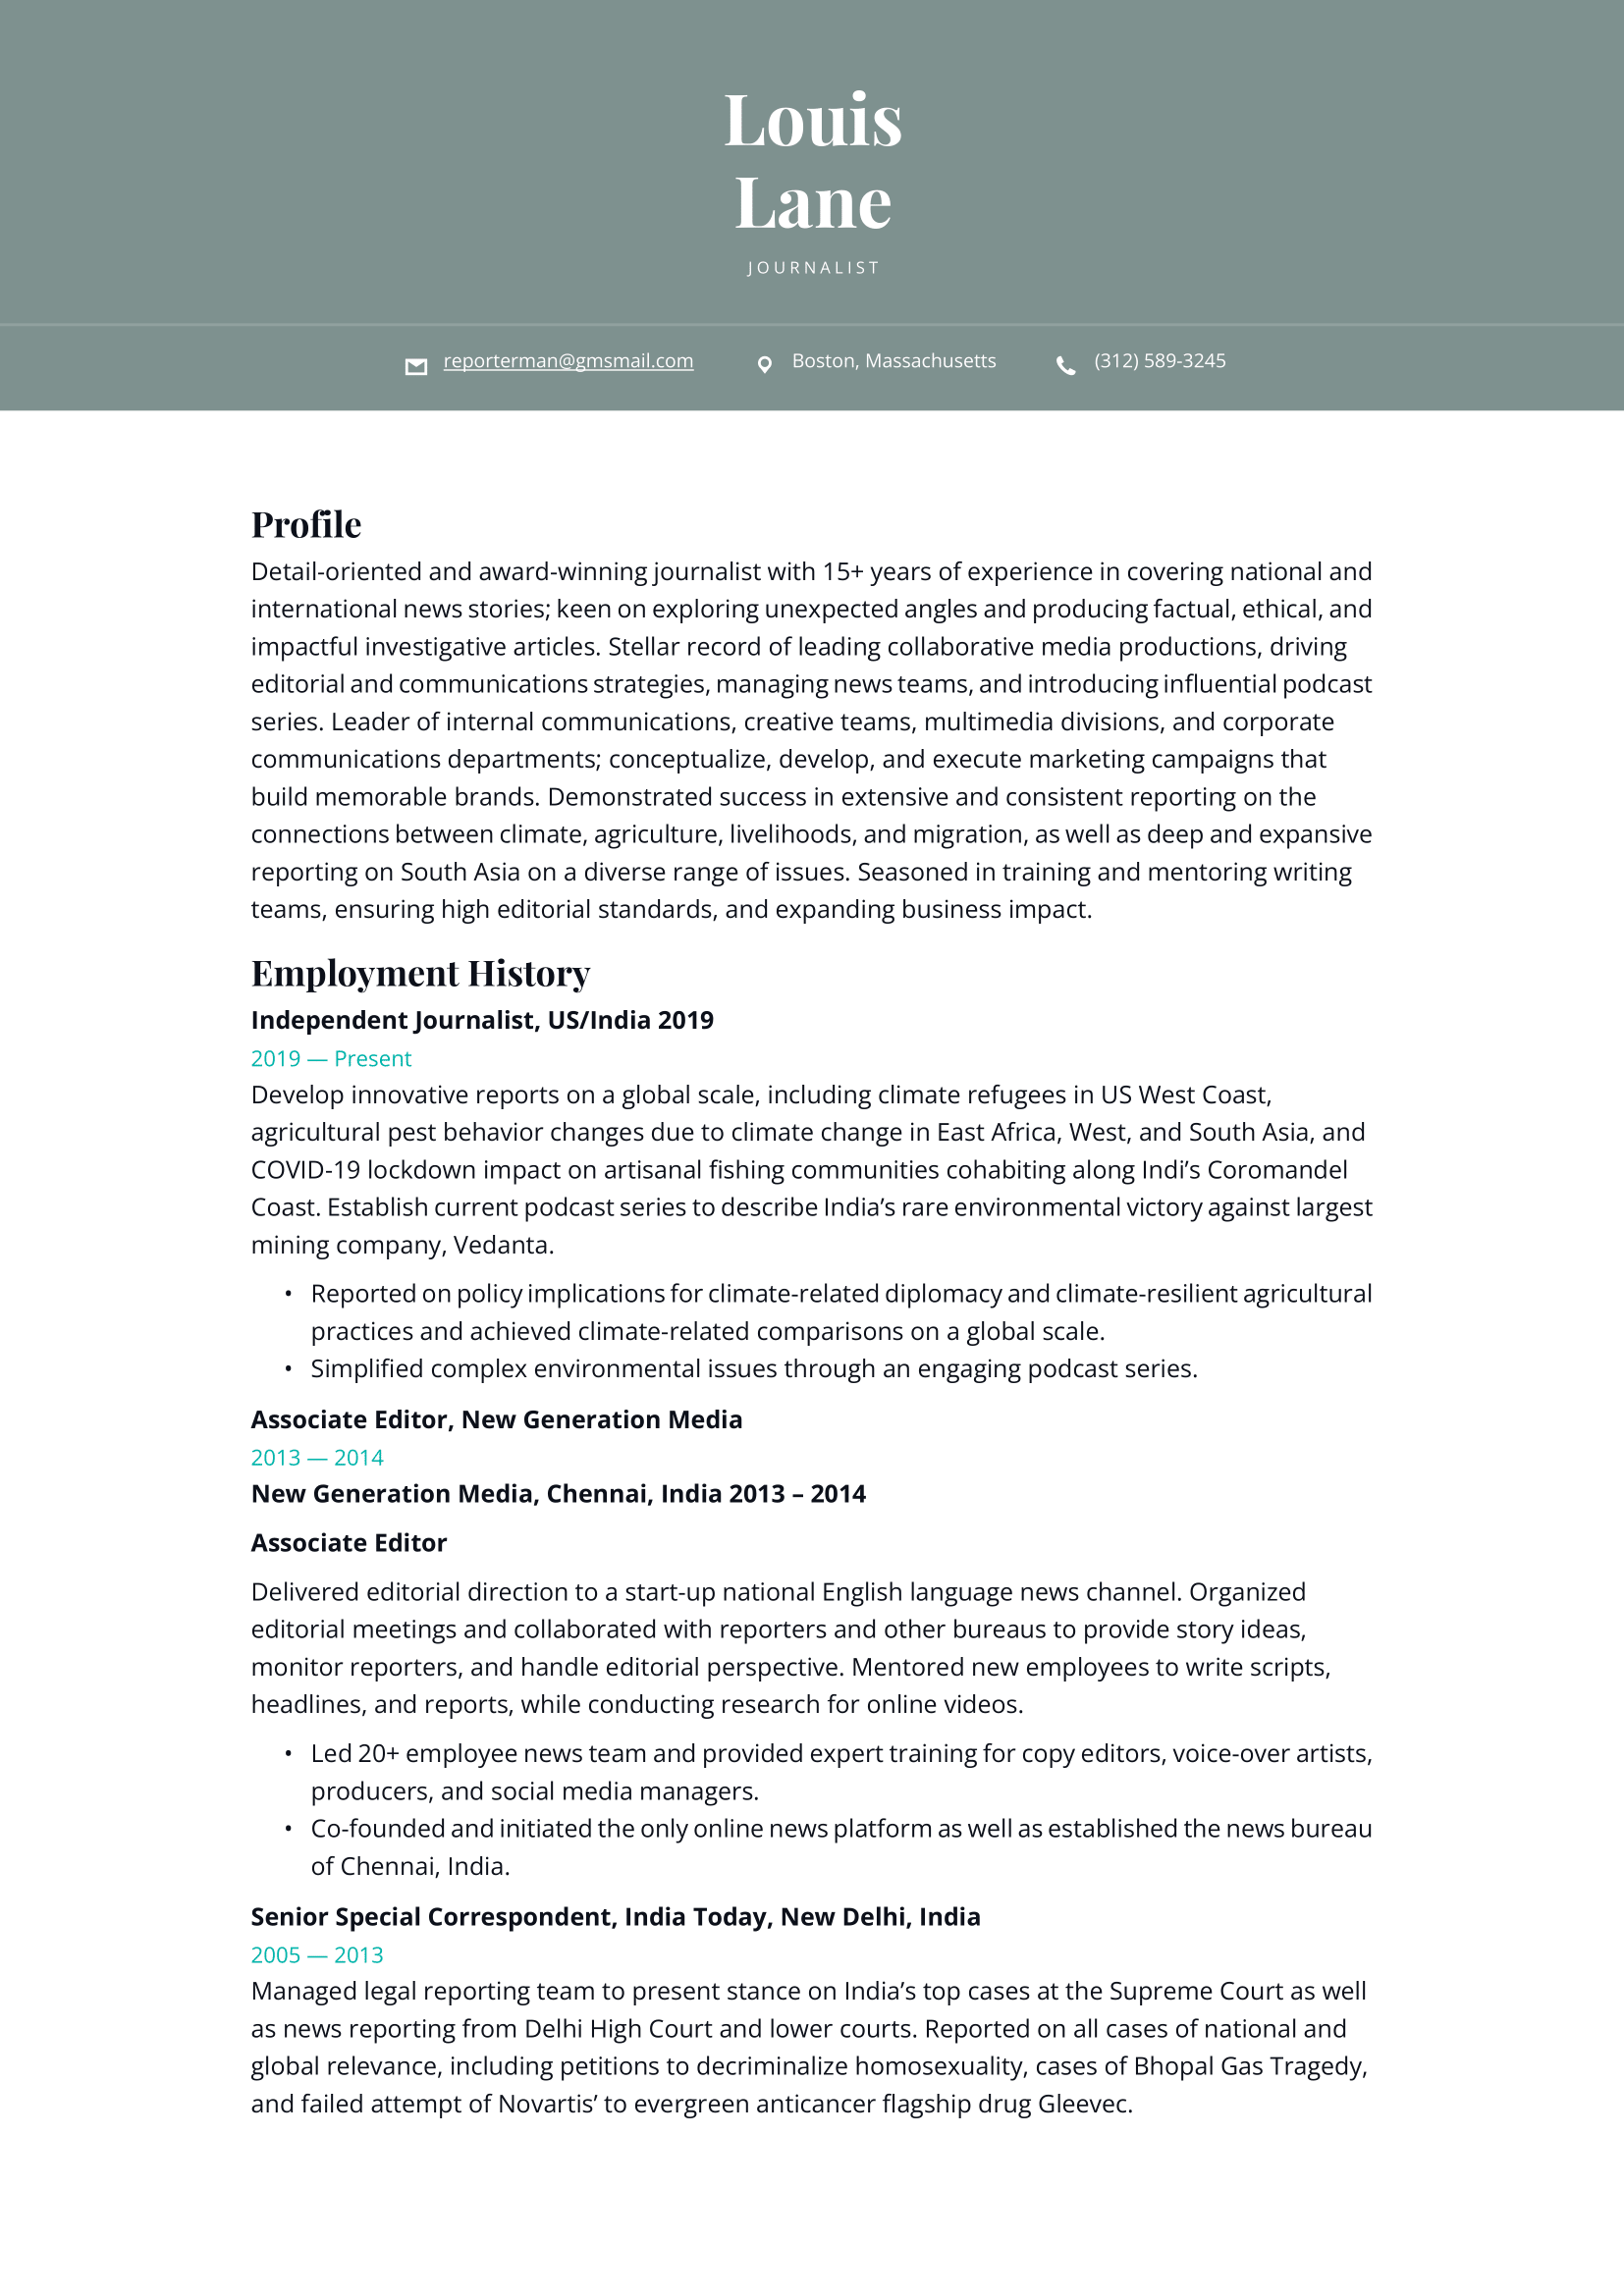 Journalist Resume Example & Writing Guide